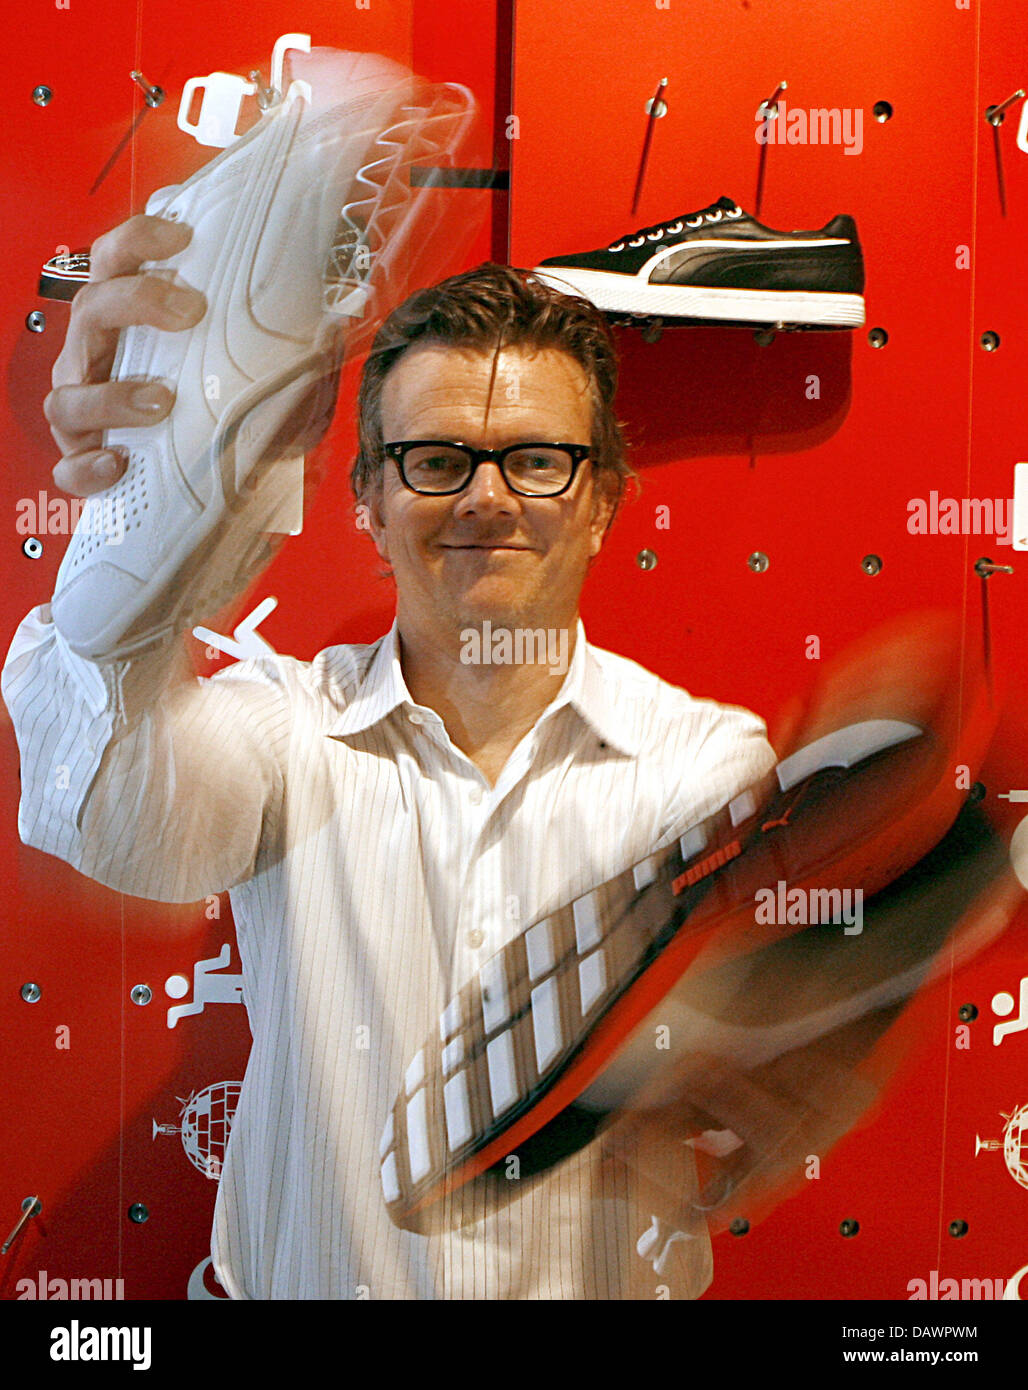 Puma senior designer Gavin Ivester poses with Puma shoes at the group's  brand centre in Nuremberg, Germany, 22 May 2007. Ivester reduced his  designing hours for he is also Senior VP and